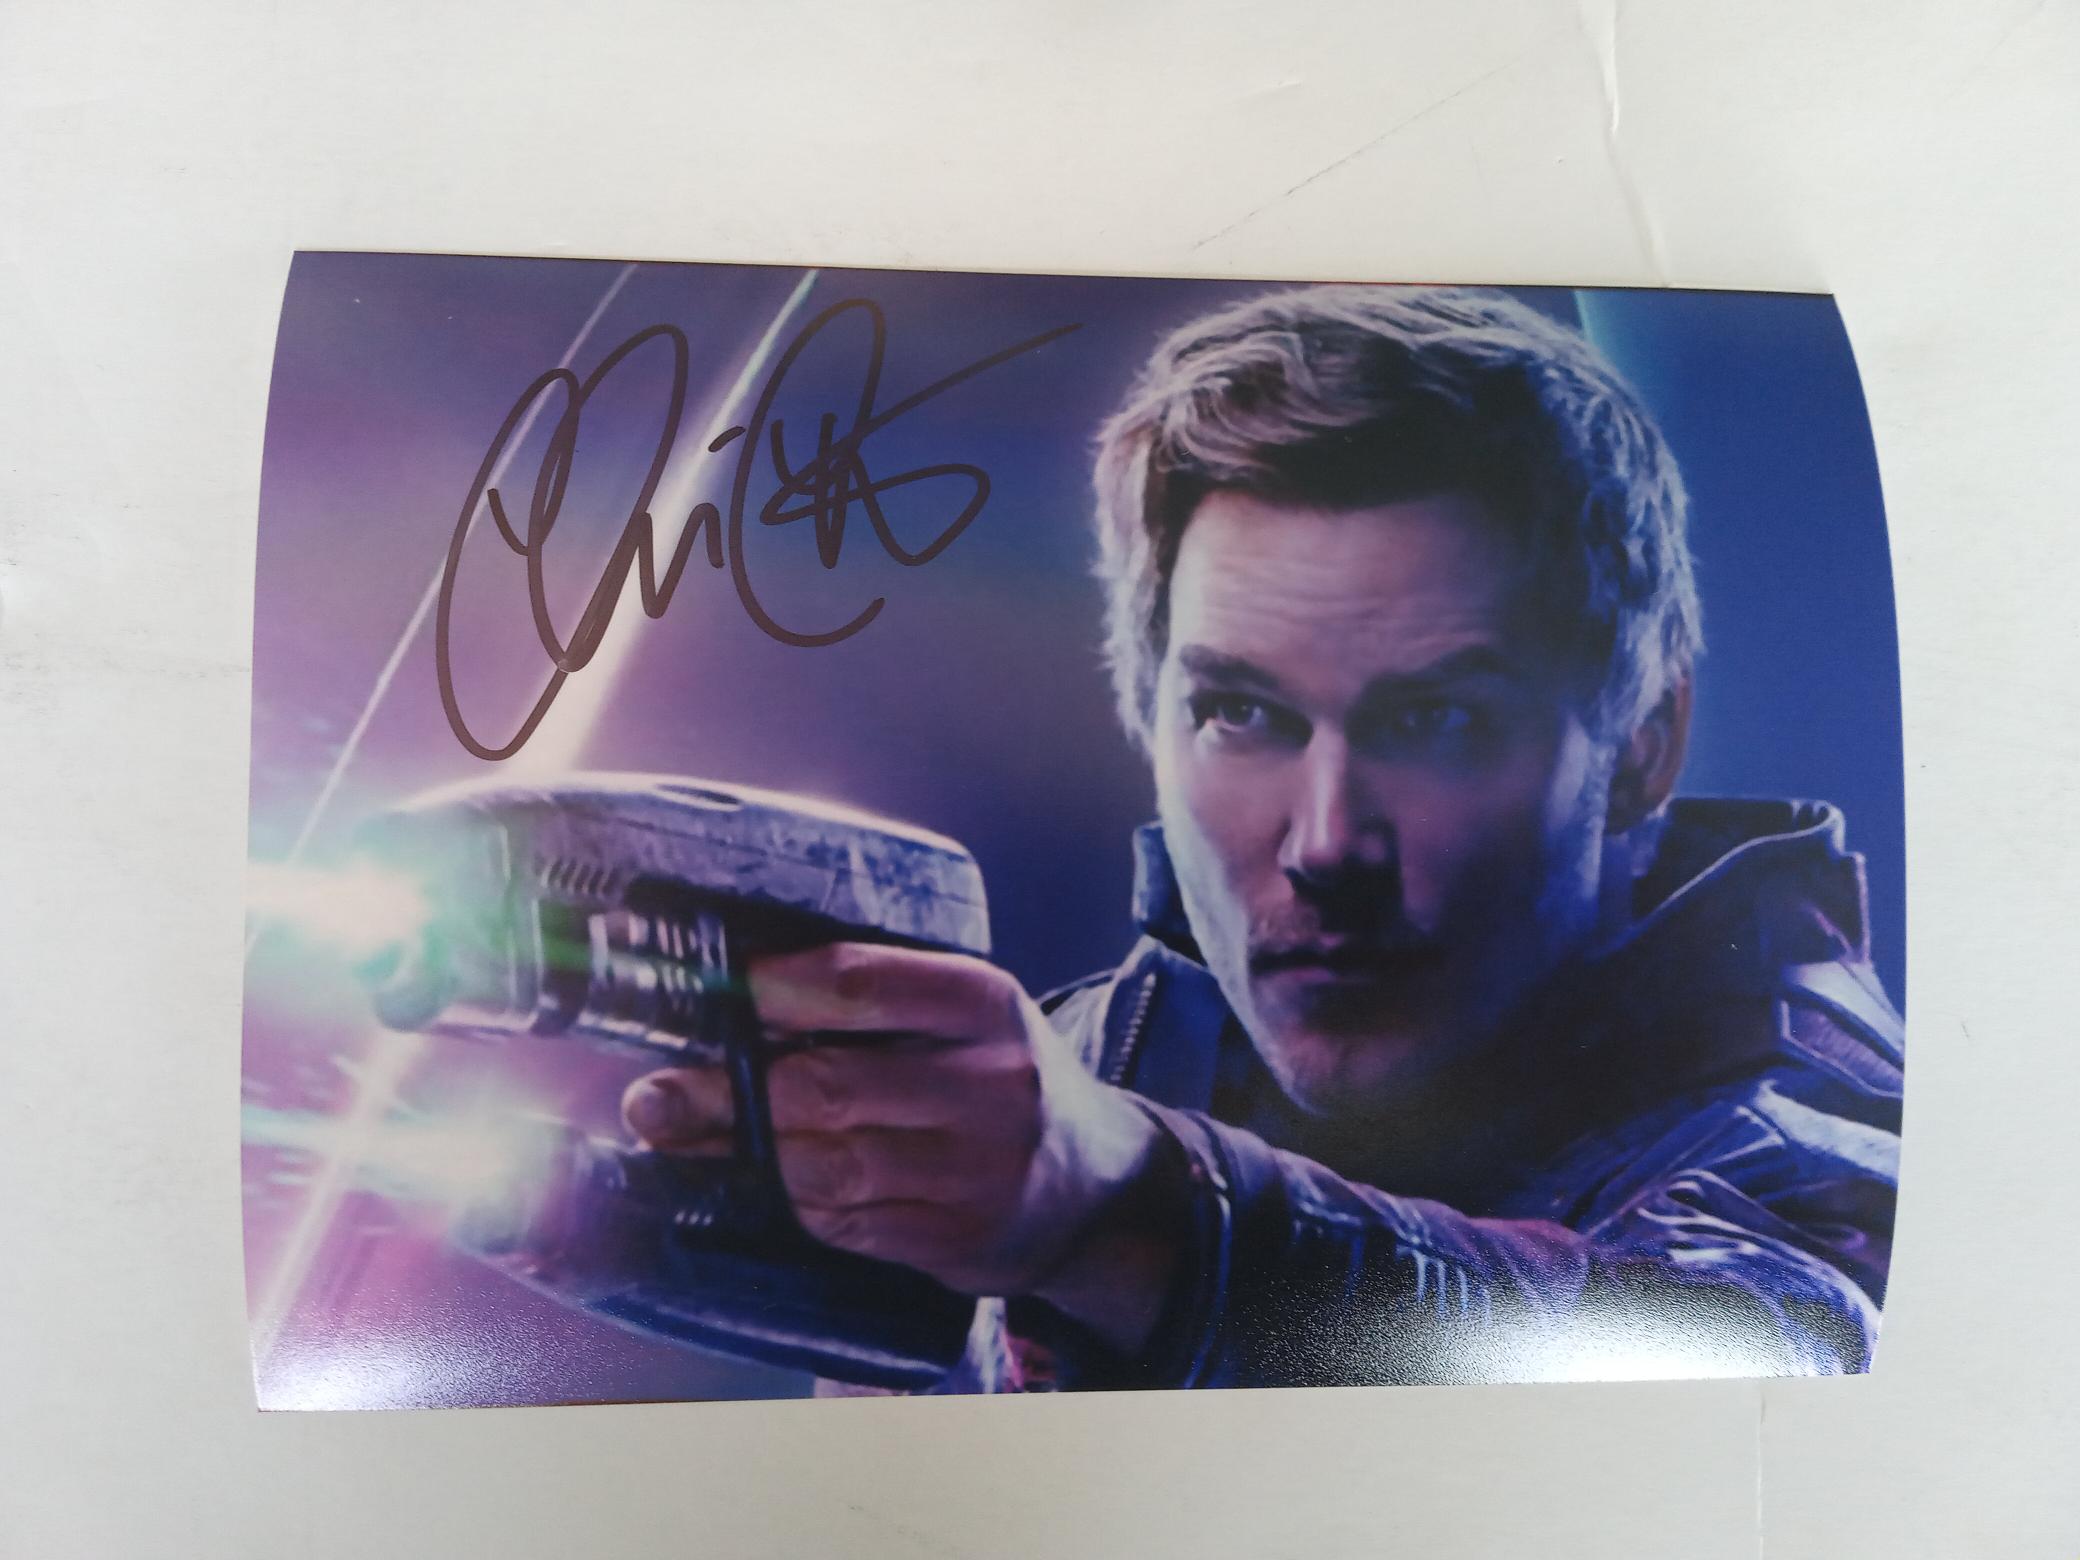 Chris Pratt Peter Quill Star-Lord Guardians of the Galaxy 5 x 7 photo signed with proof